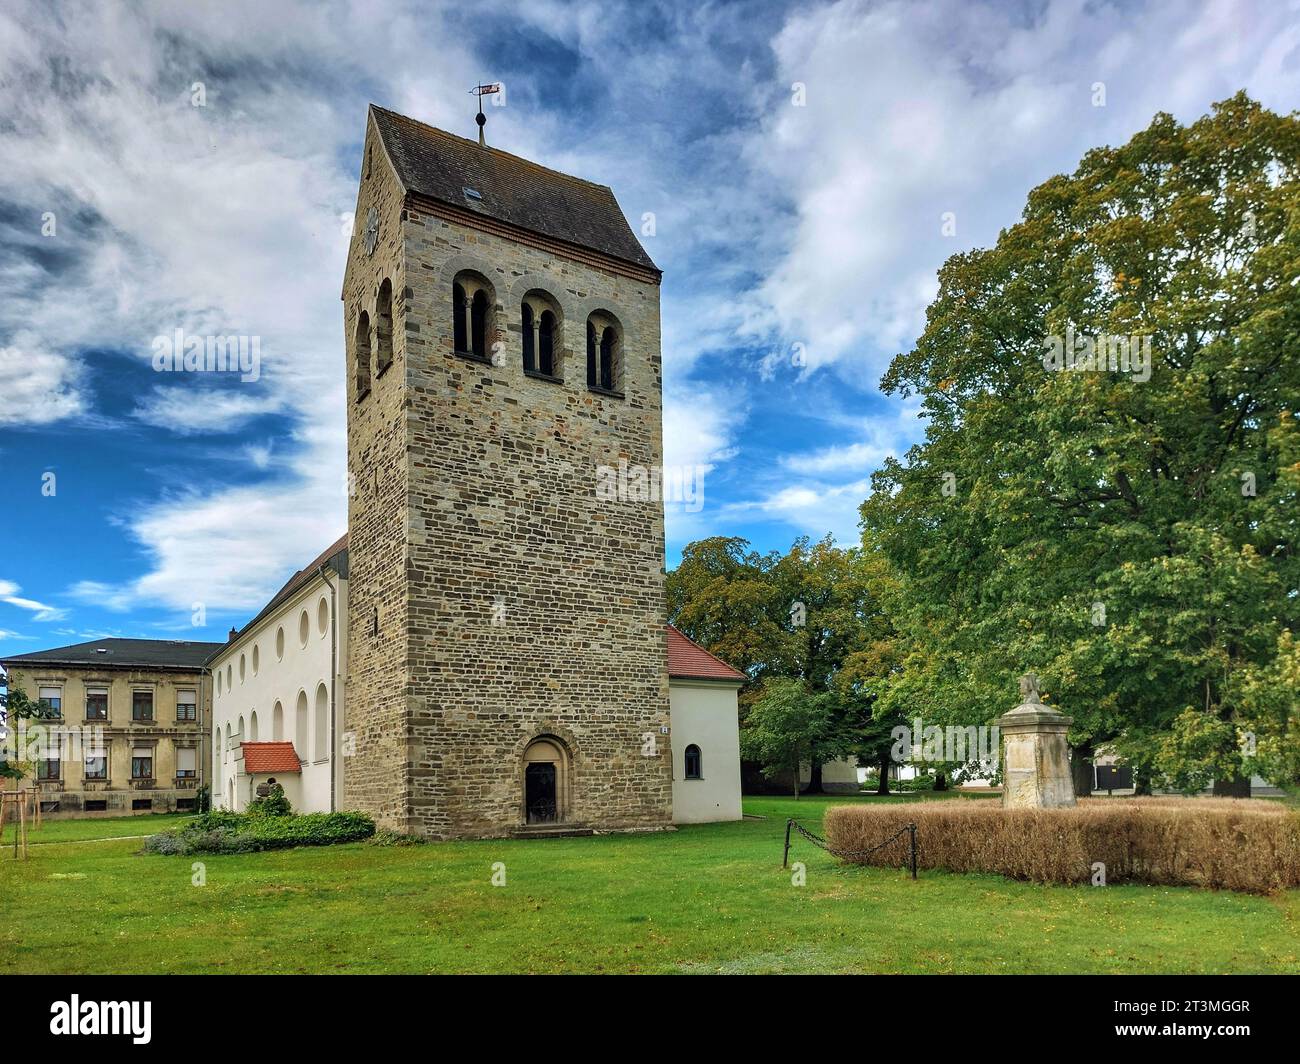 St Pancras church in the small town of Welsleben in Germany. Stock Photo